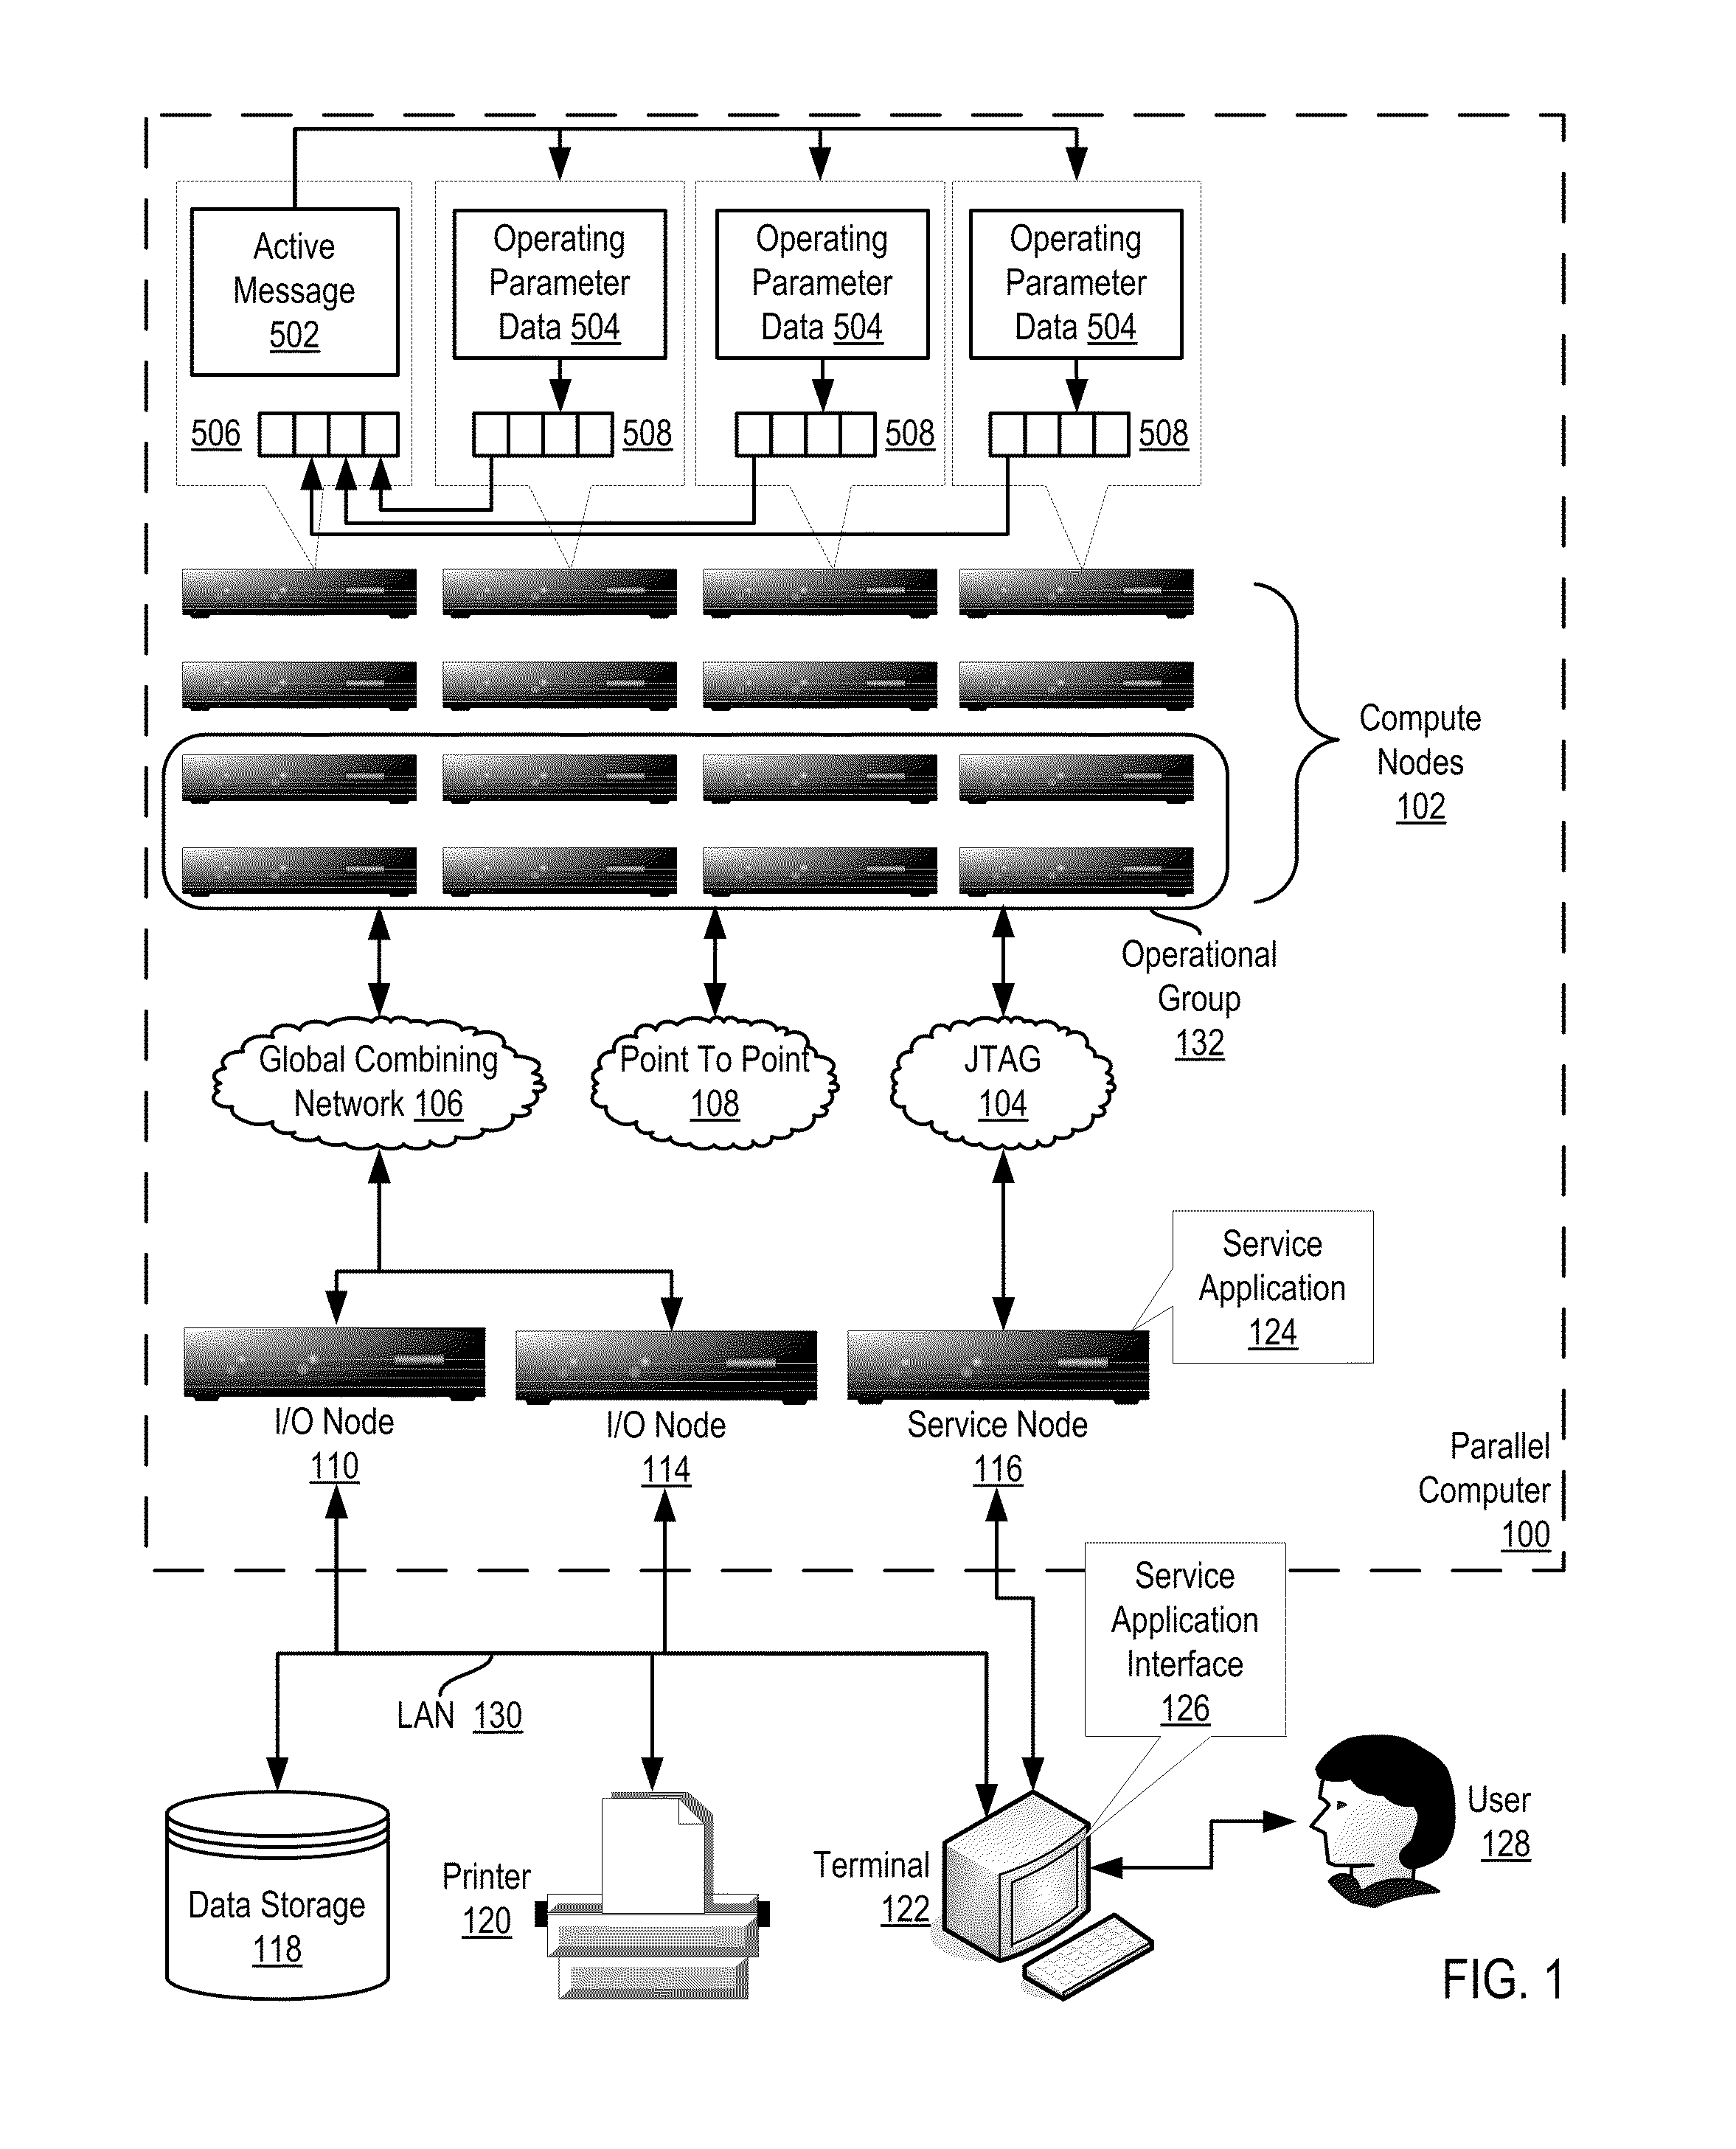 Monitoring Operating Parameters In A Distributed Computing System With Active Messages